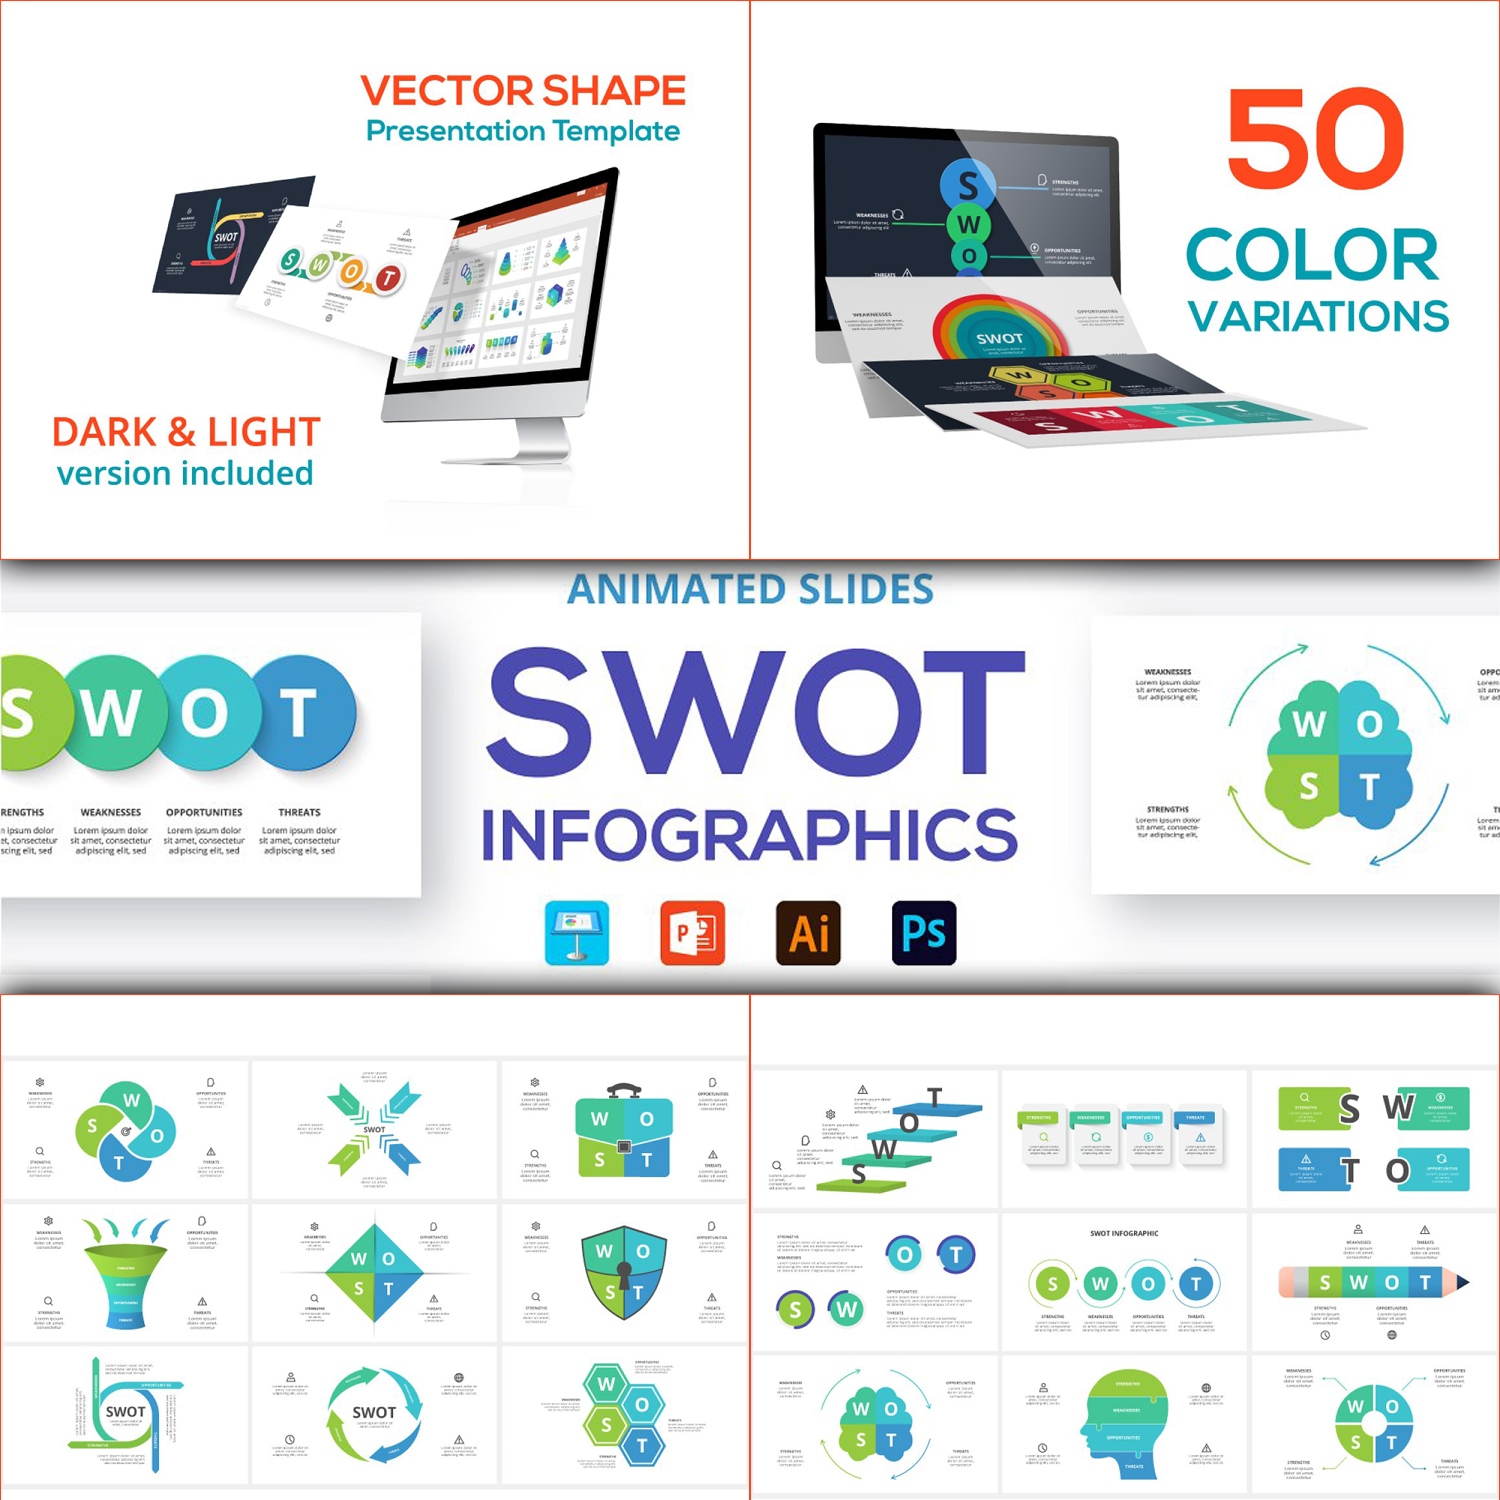 Swot animated infographics preview.